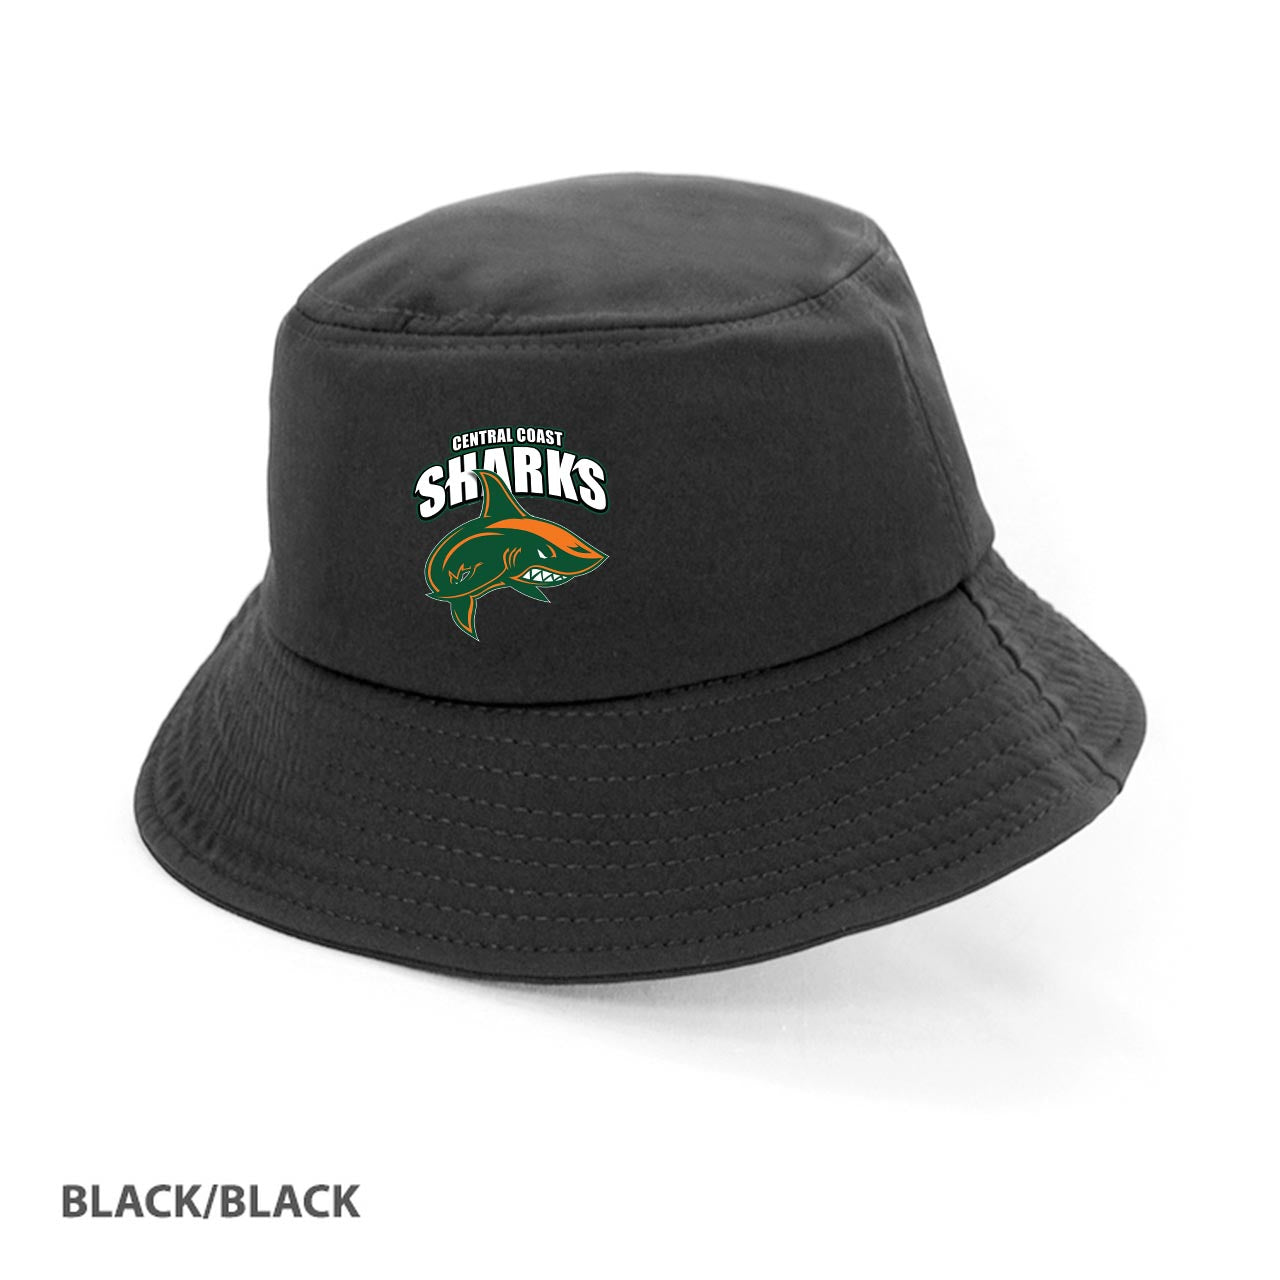 Central Coast Sharks Embroidered Bucket Hat